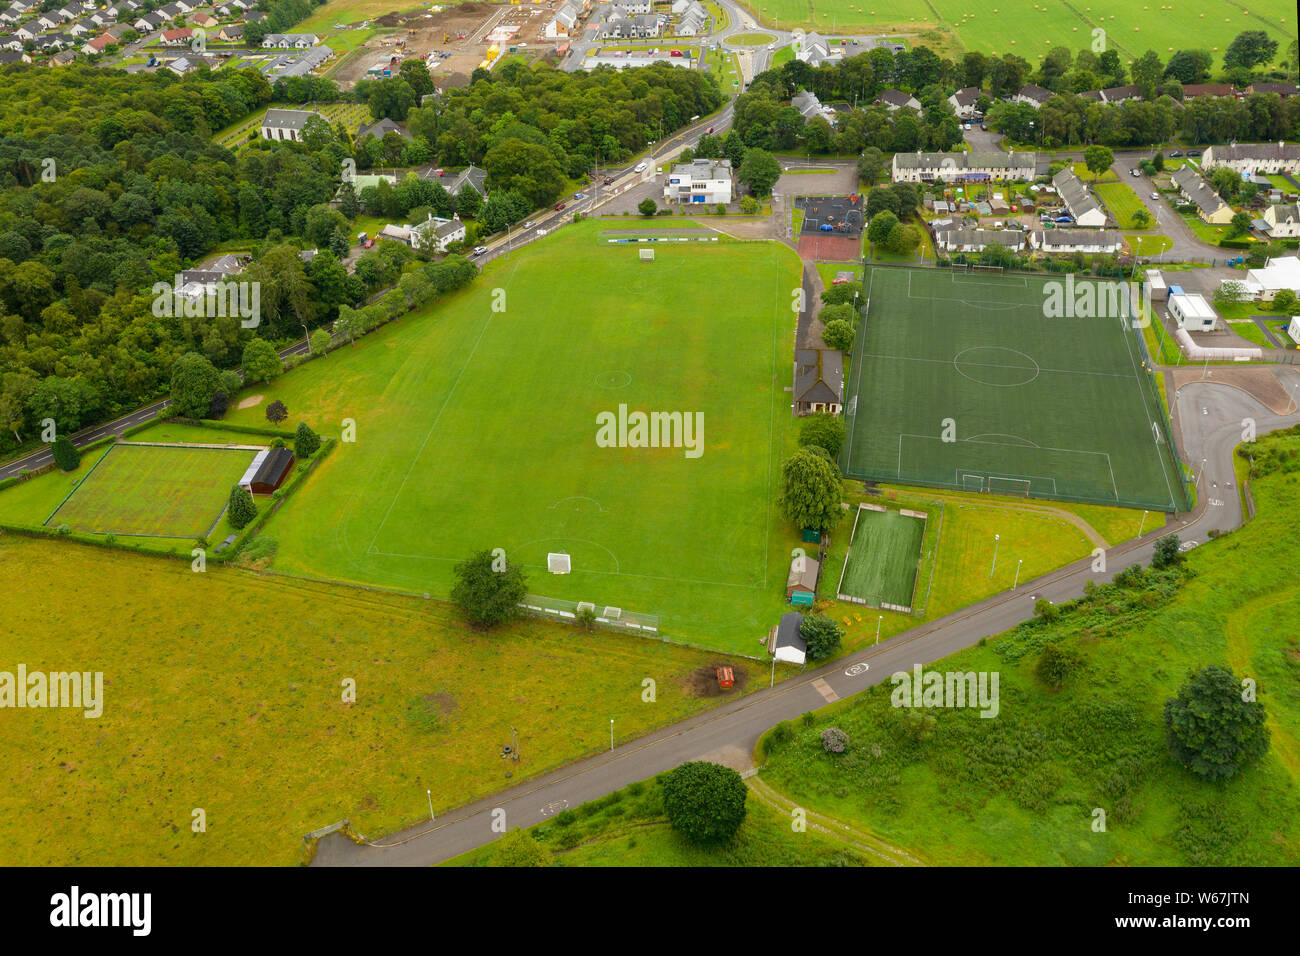 An aerial view of the Blairbeg shinty pitch in Drumnadrochit, near Inverness, Scotland, home of Glen Urquhart shinty Club. Stock Photo